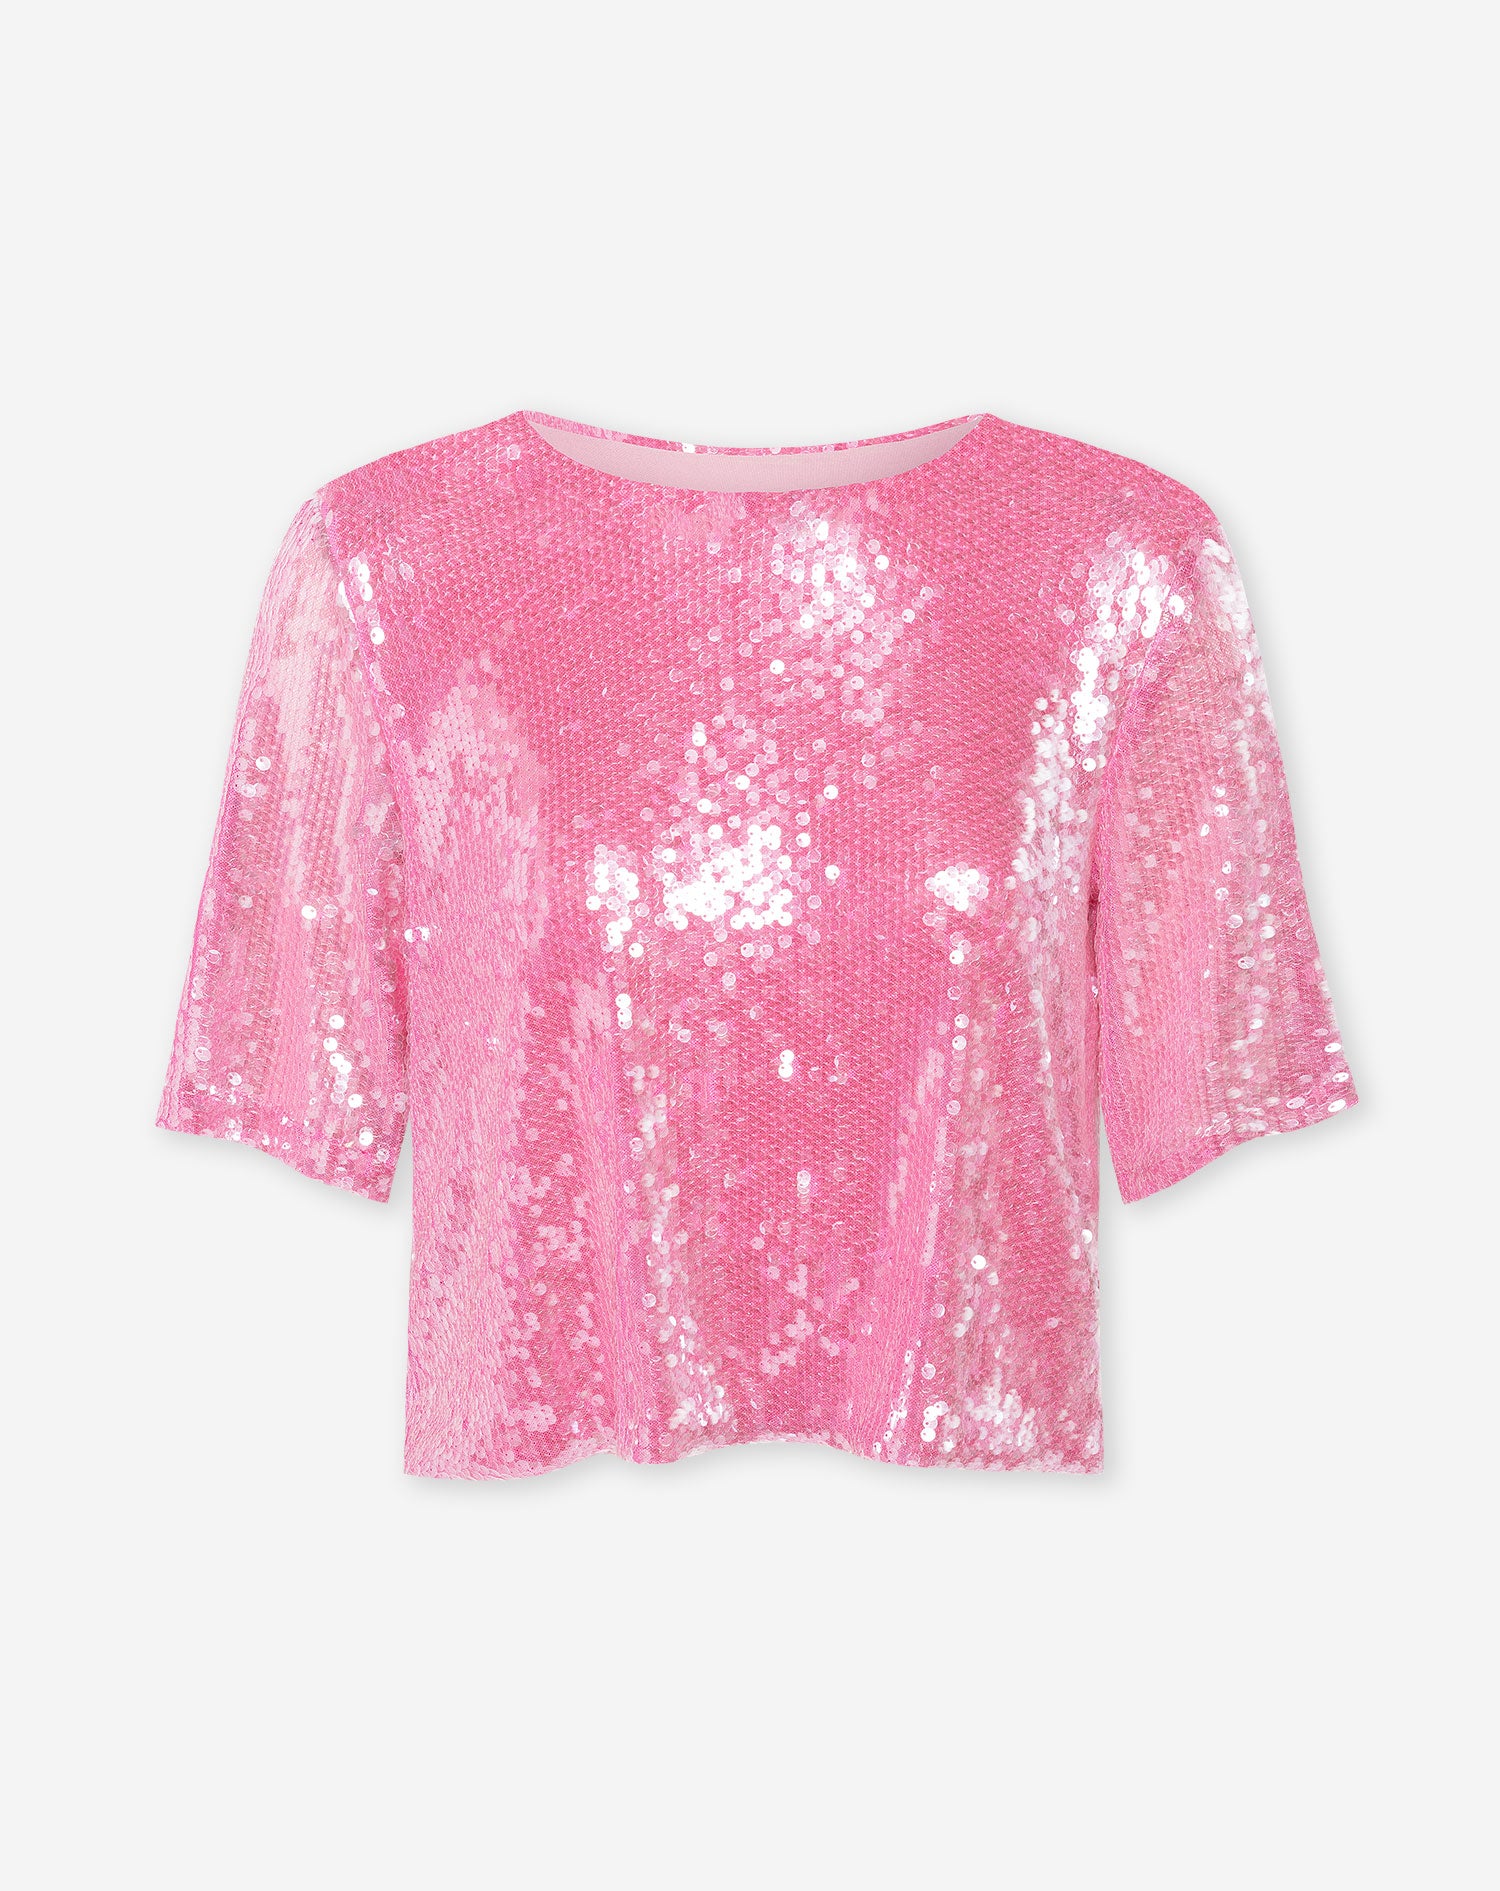 TRANSPARANT SEQUINS TEE TOP PINK